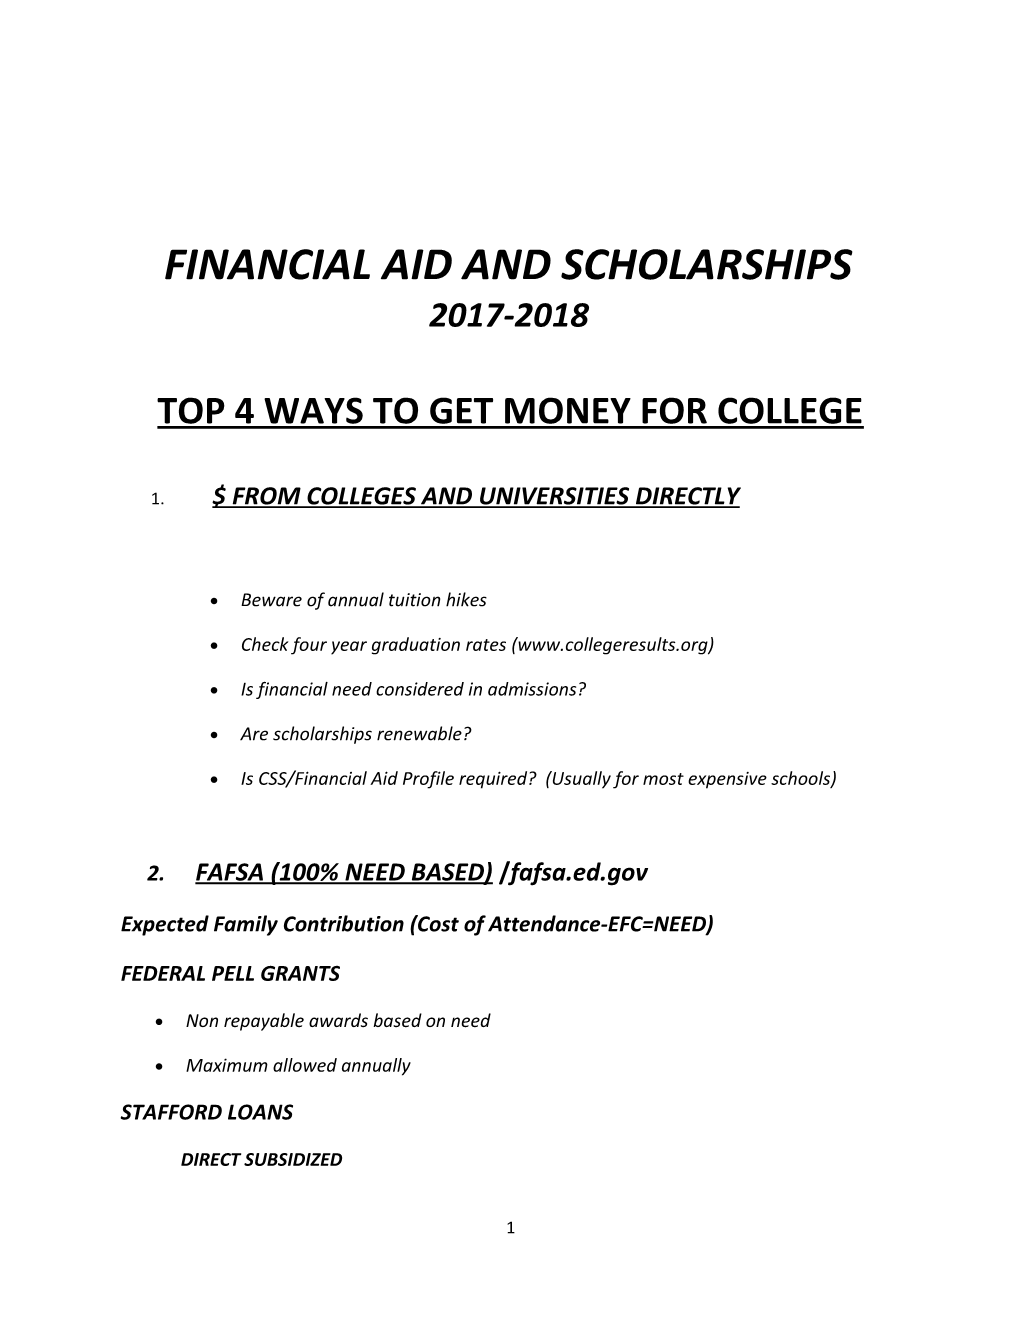 Financial Aid and Scholarships